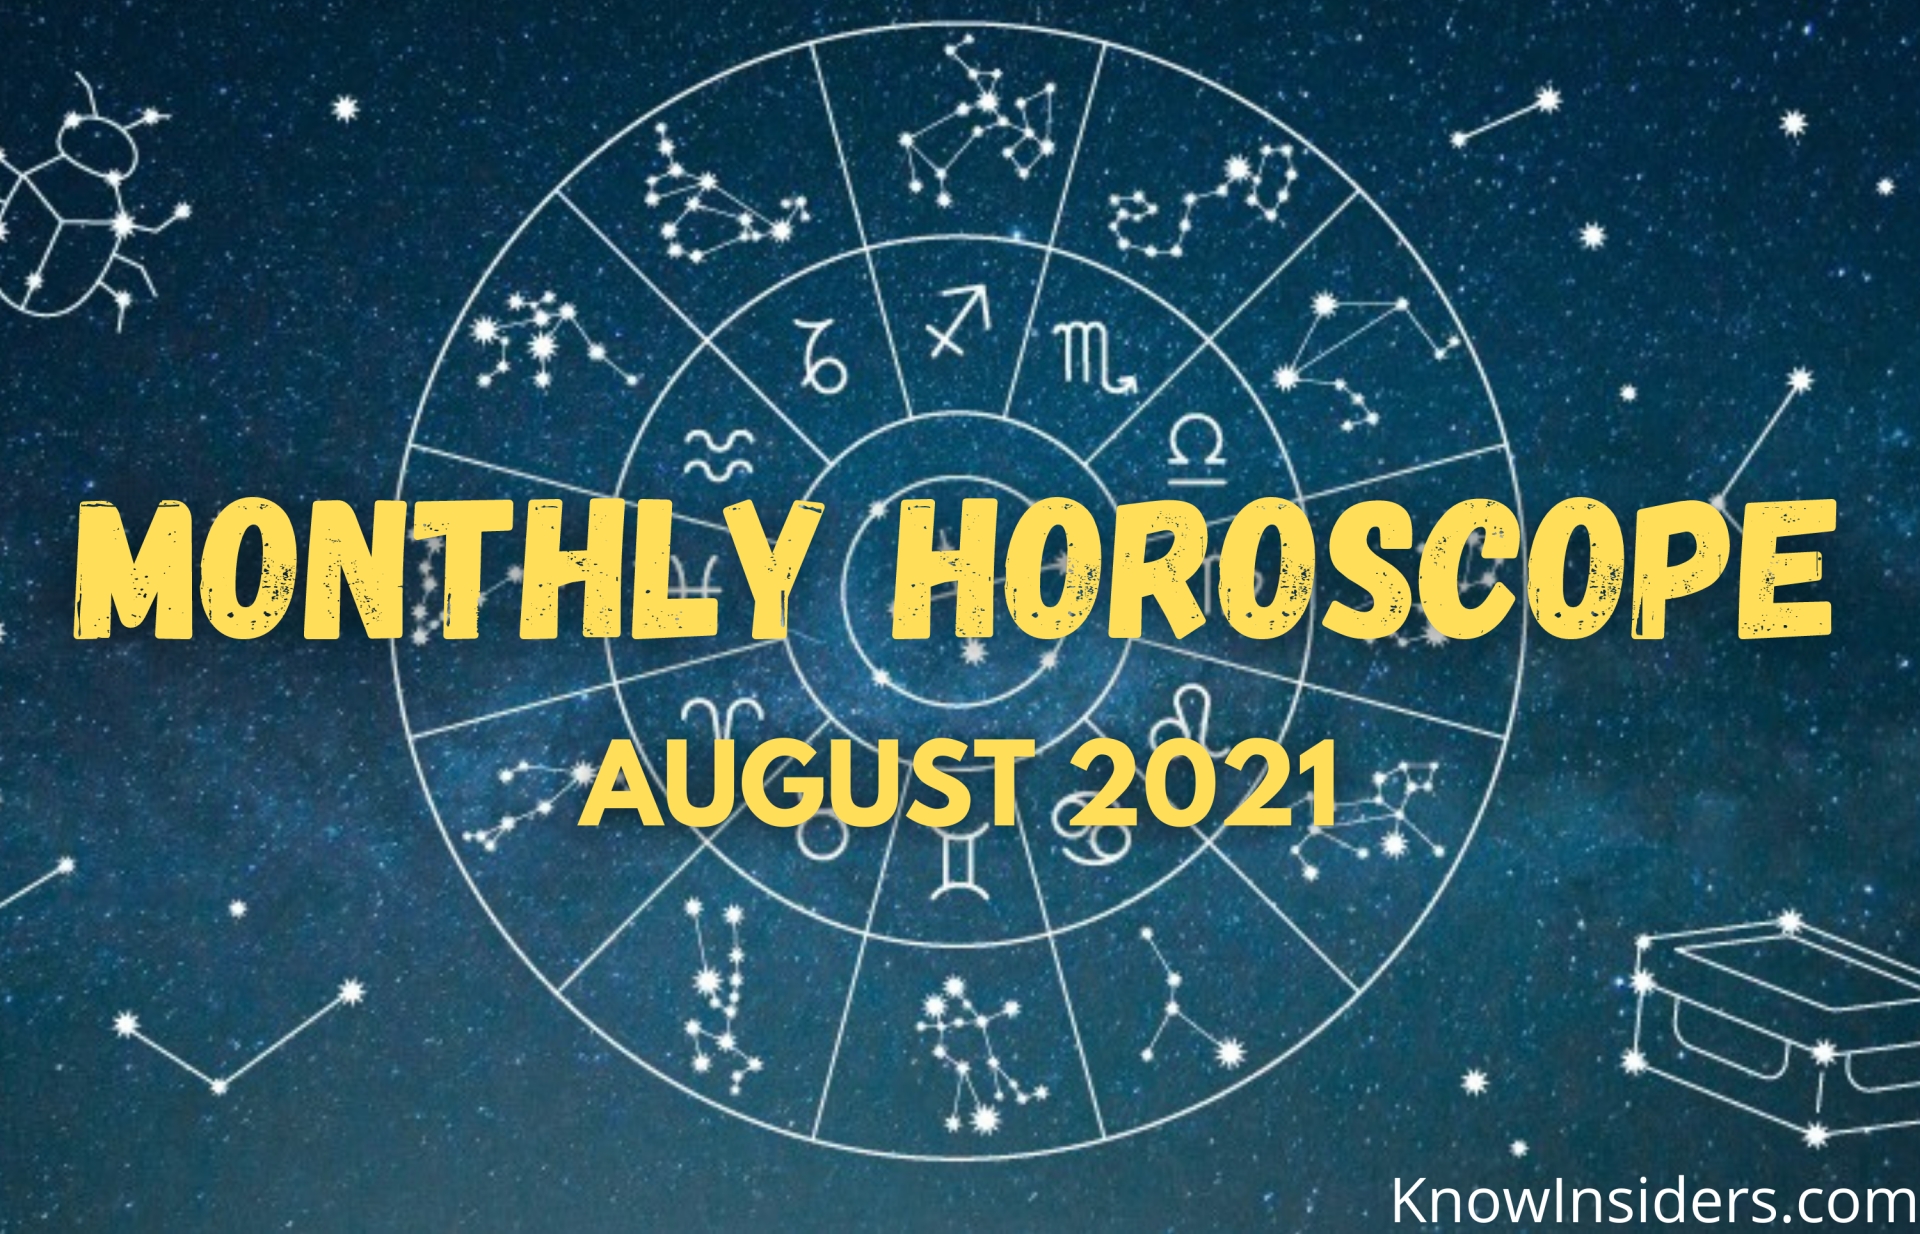 August 2021 Monthly Horoscope - Predictions for Love, Career, Money and Health